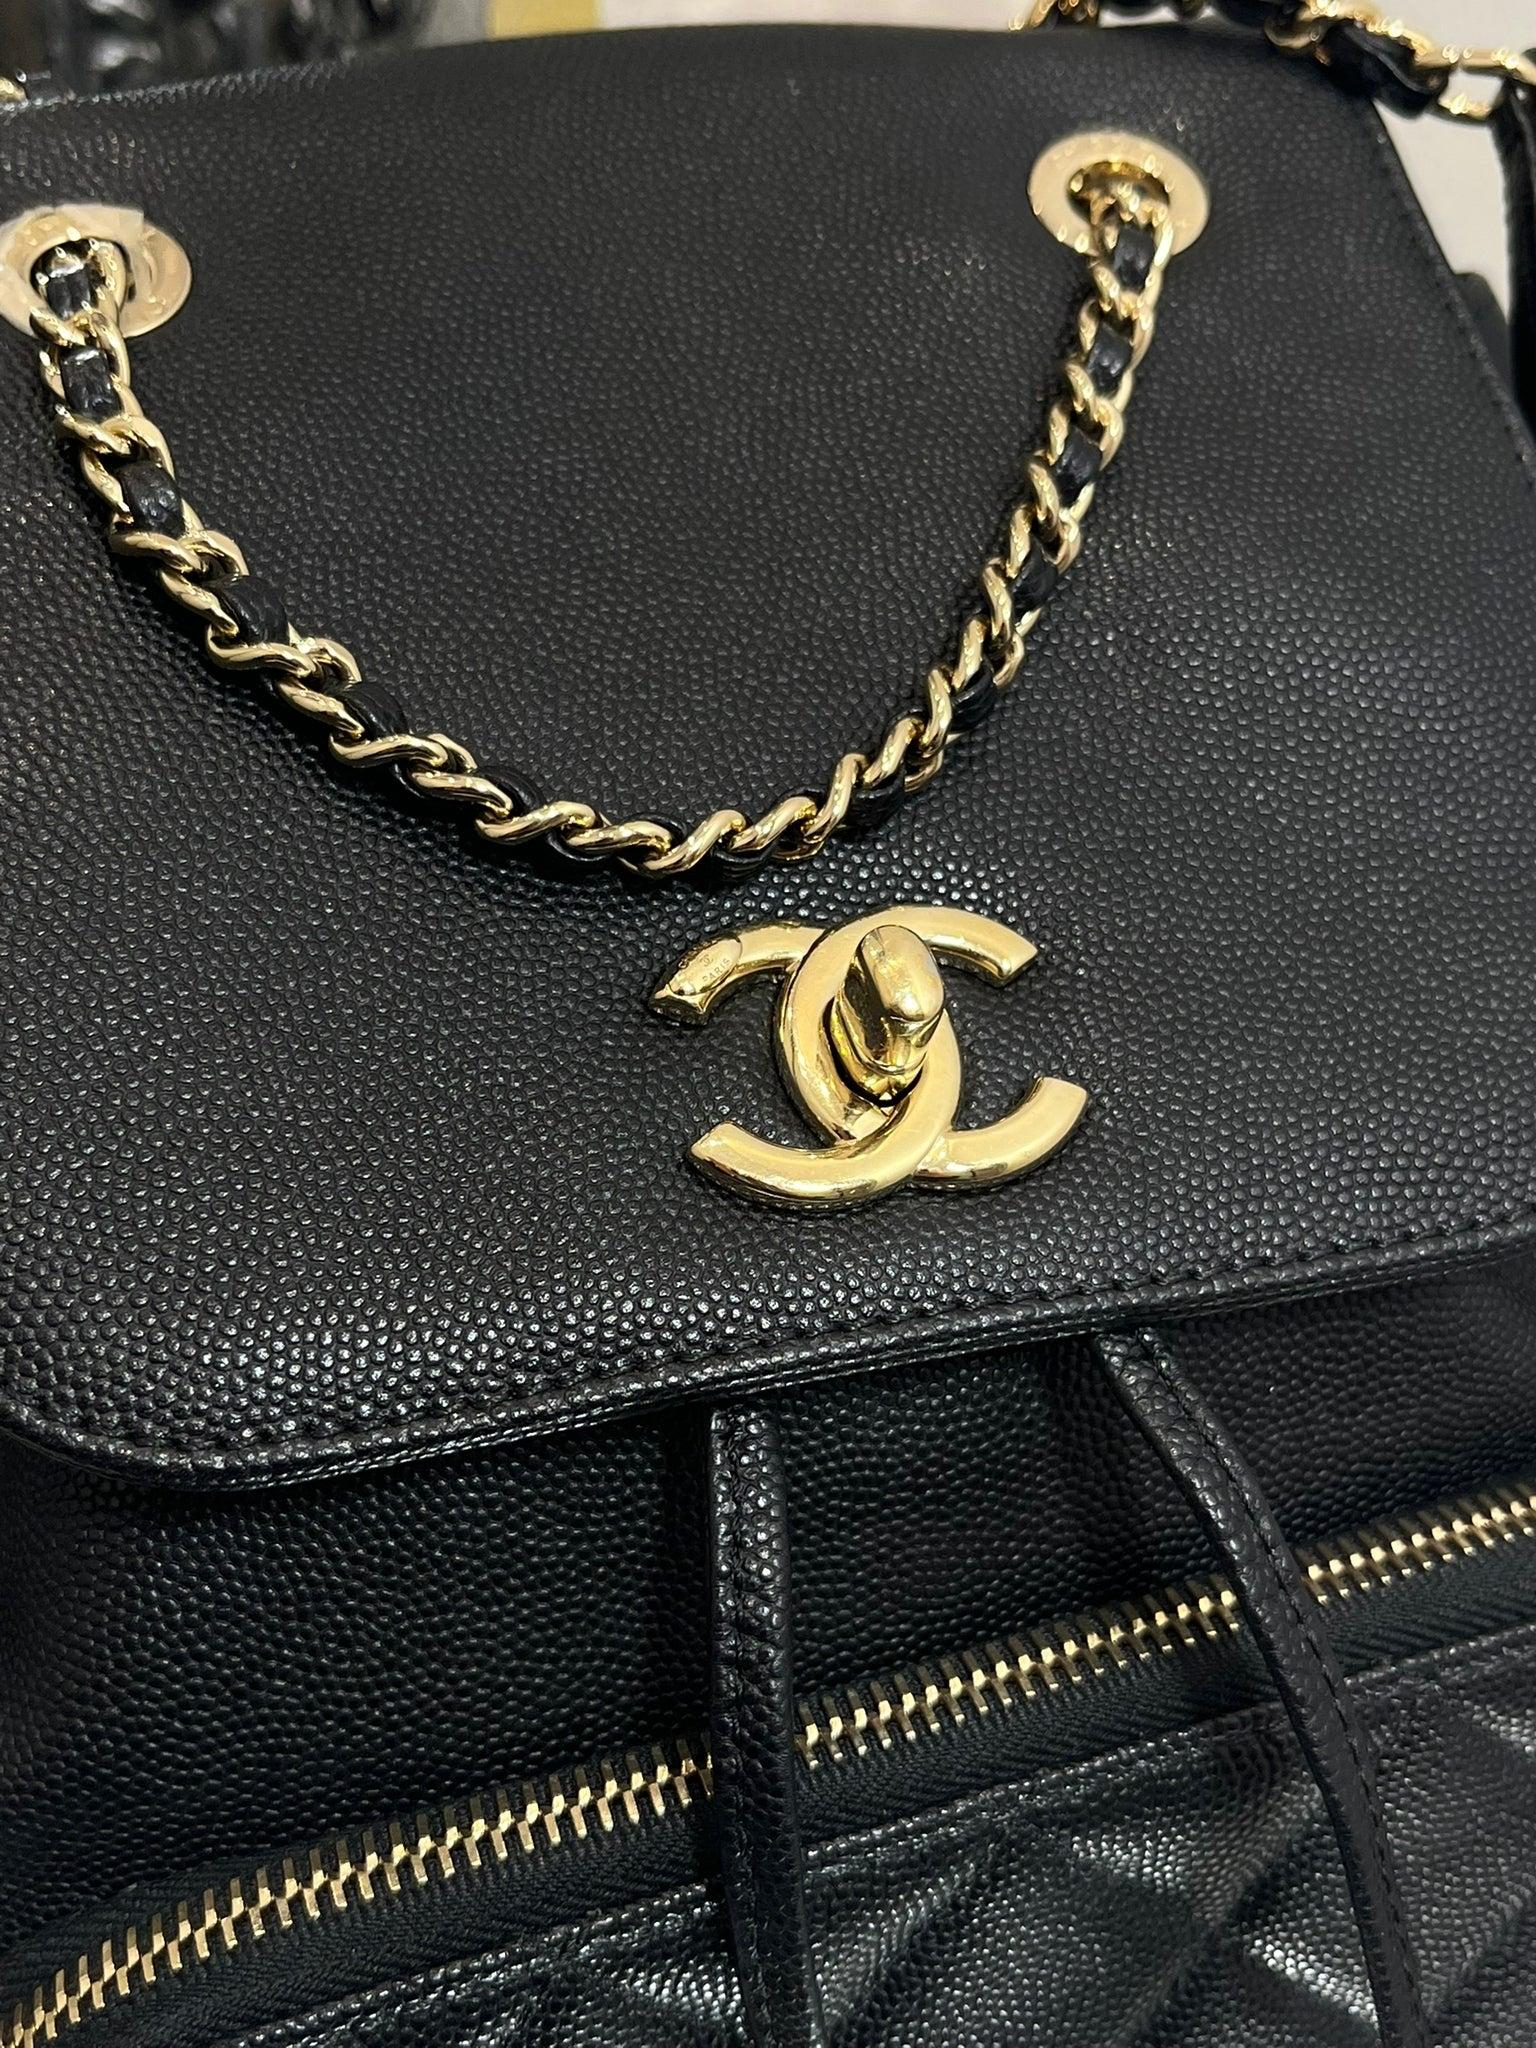 Chanel Affinity Caviar Leather Backpack For Sale 1